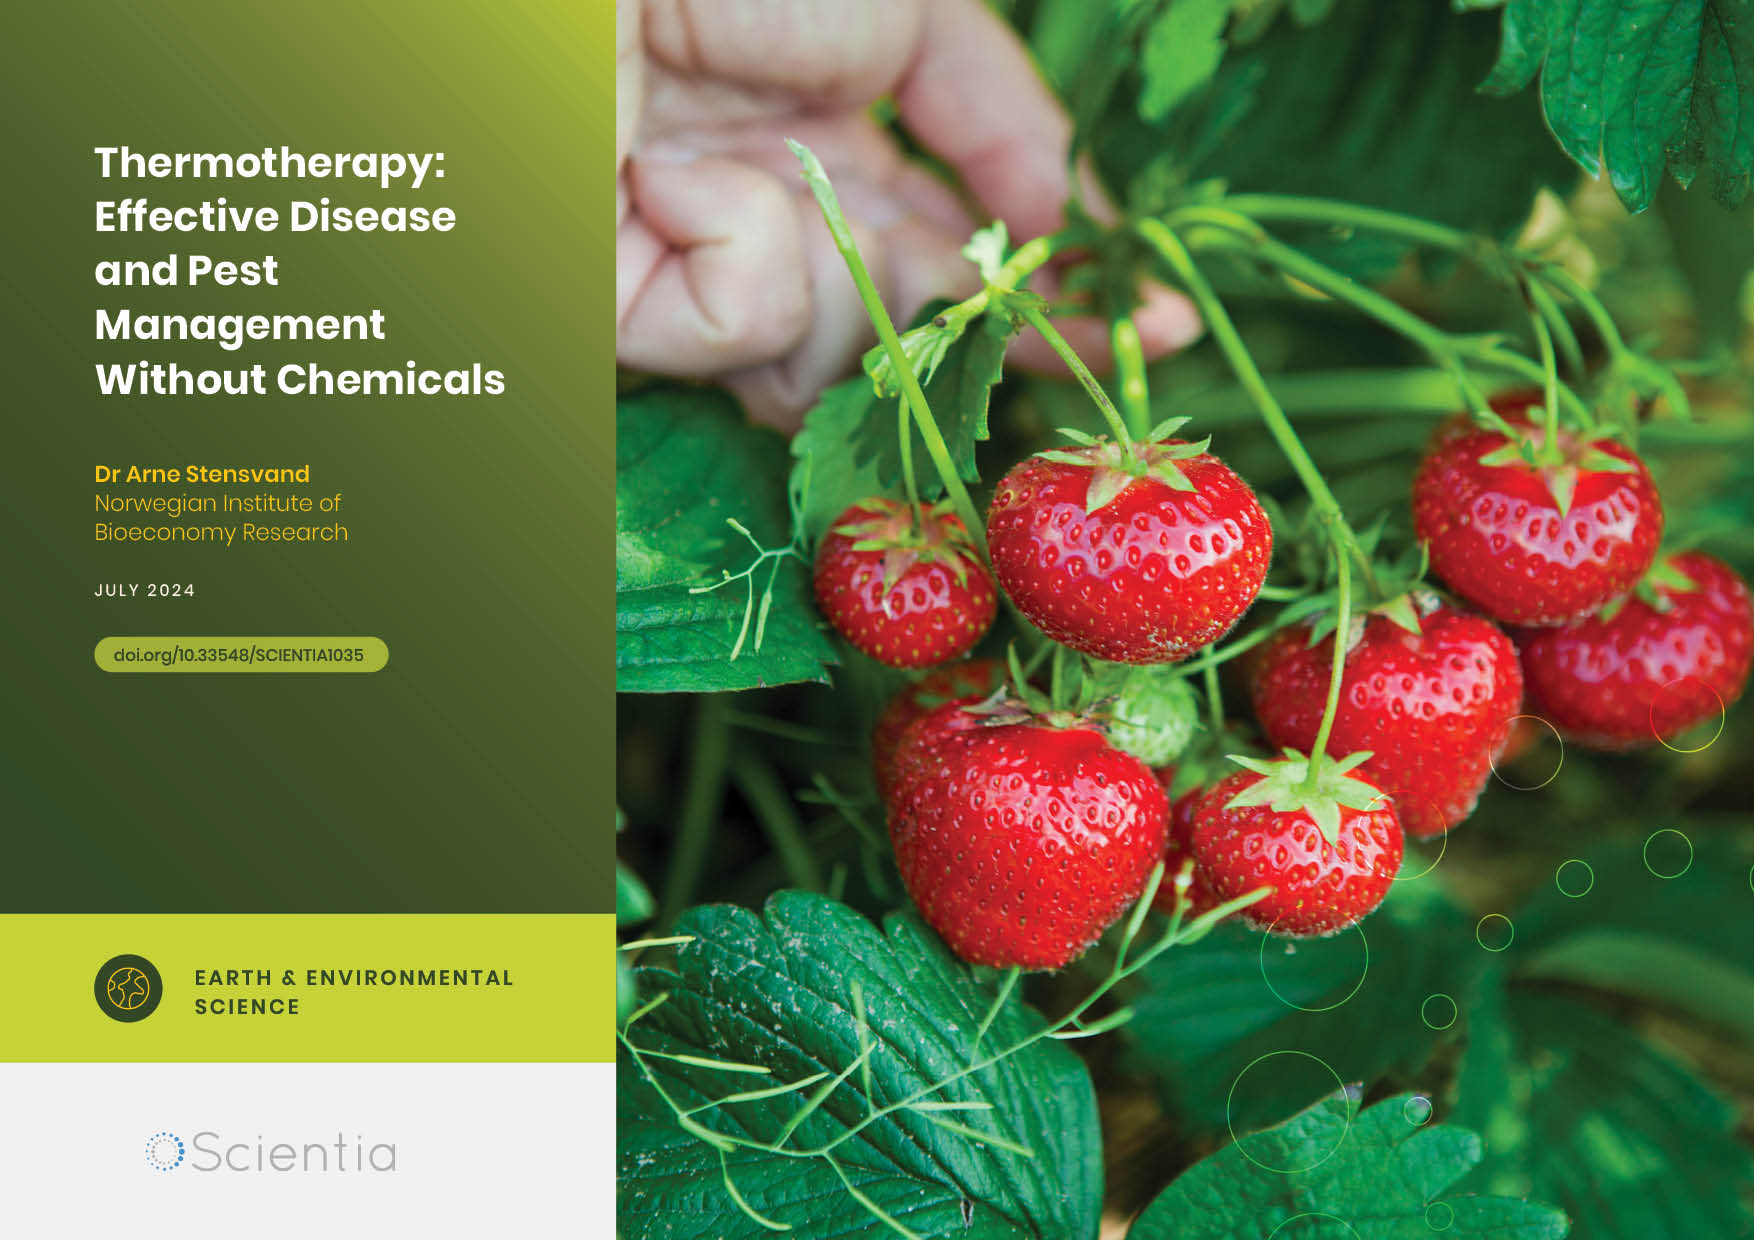 Dr Arne Stensvand | Thermotherapy: Effective Disease and Pest Management Without Chemicals